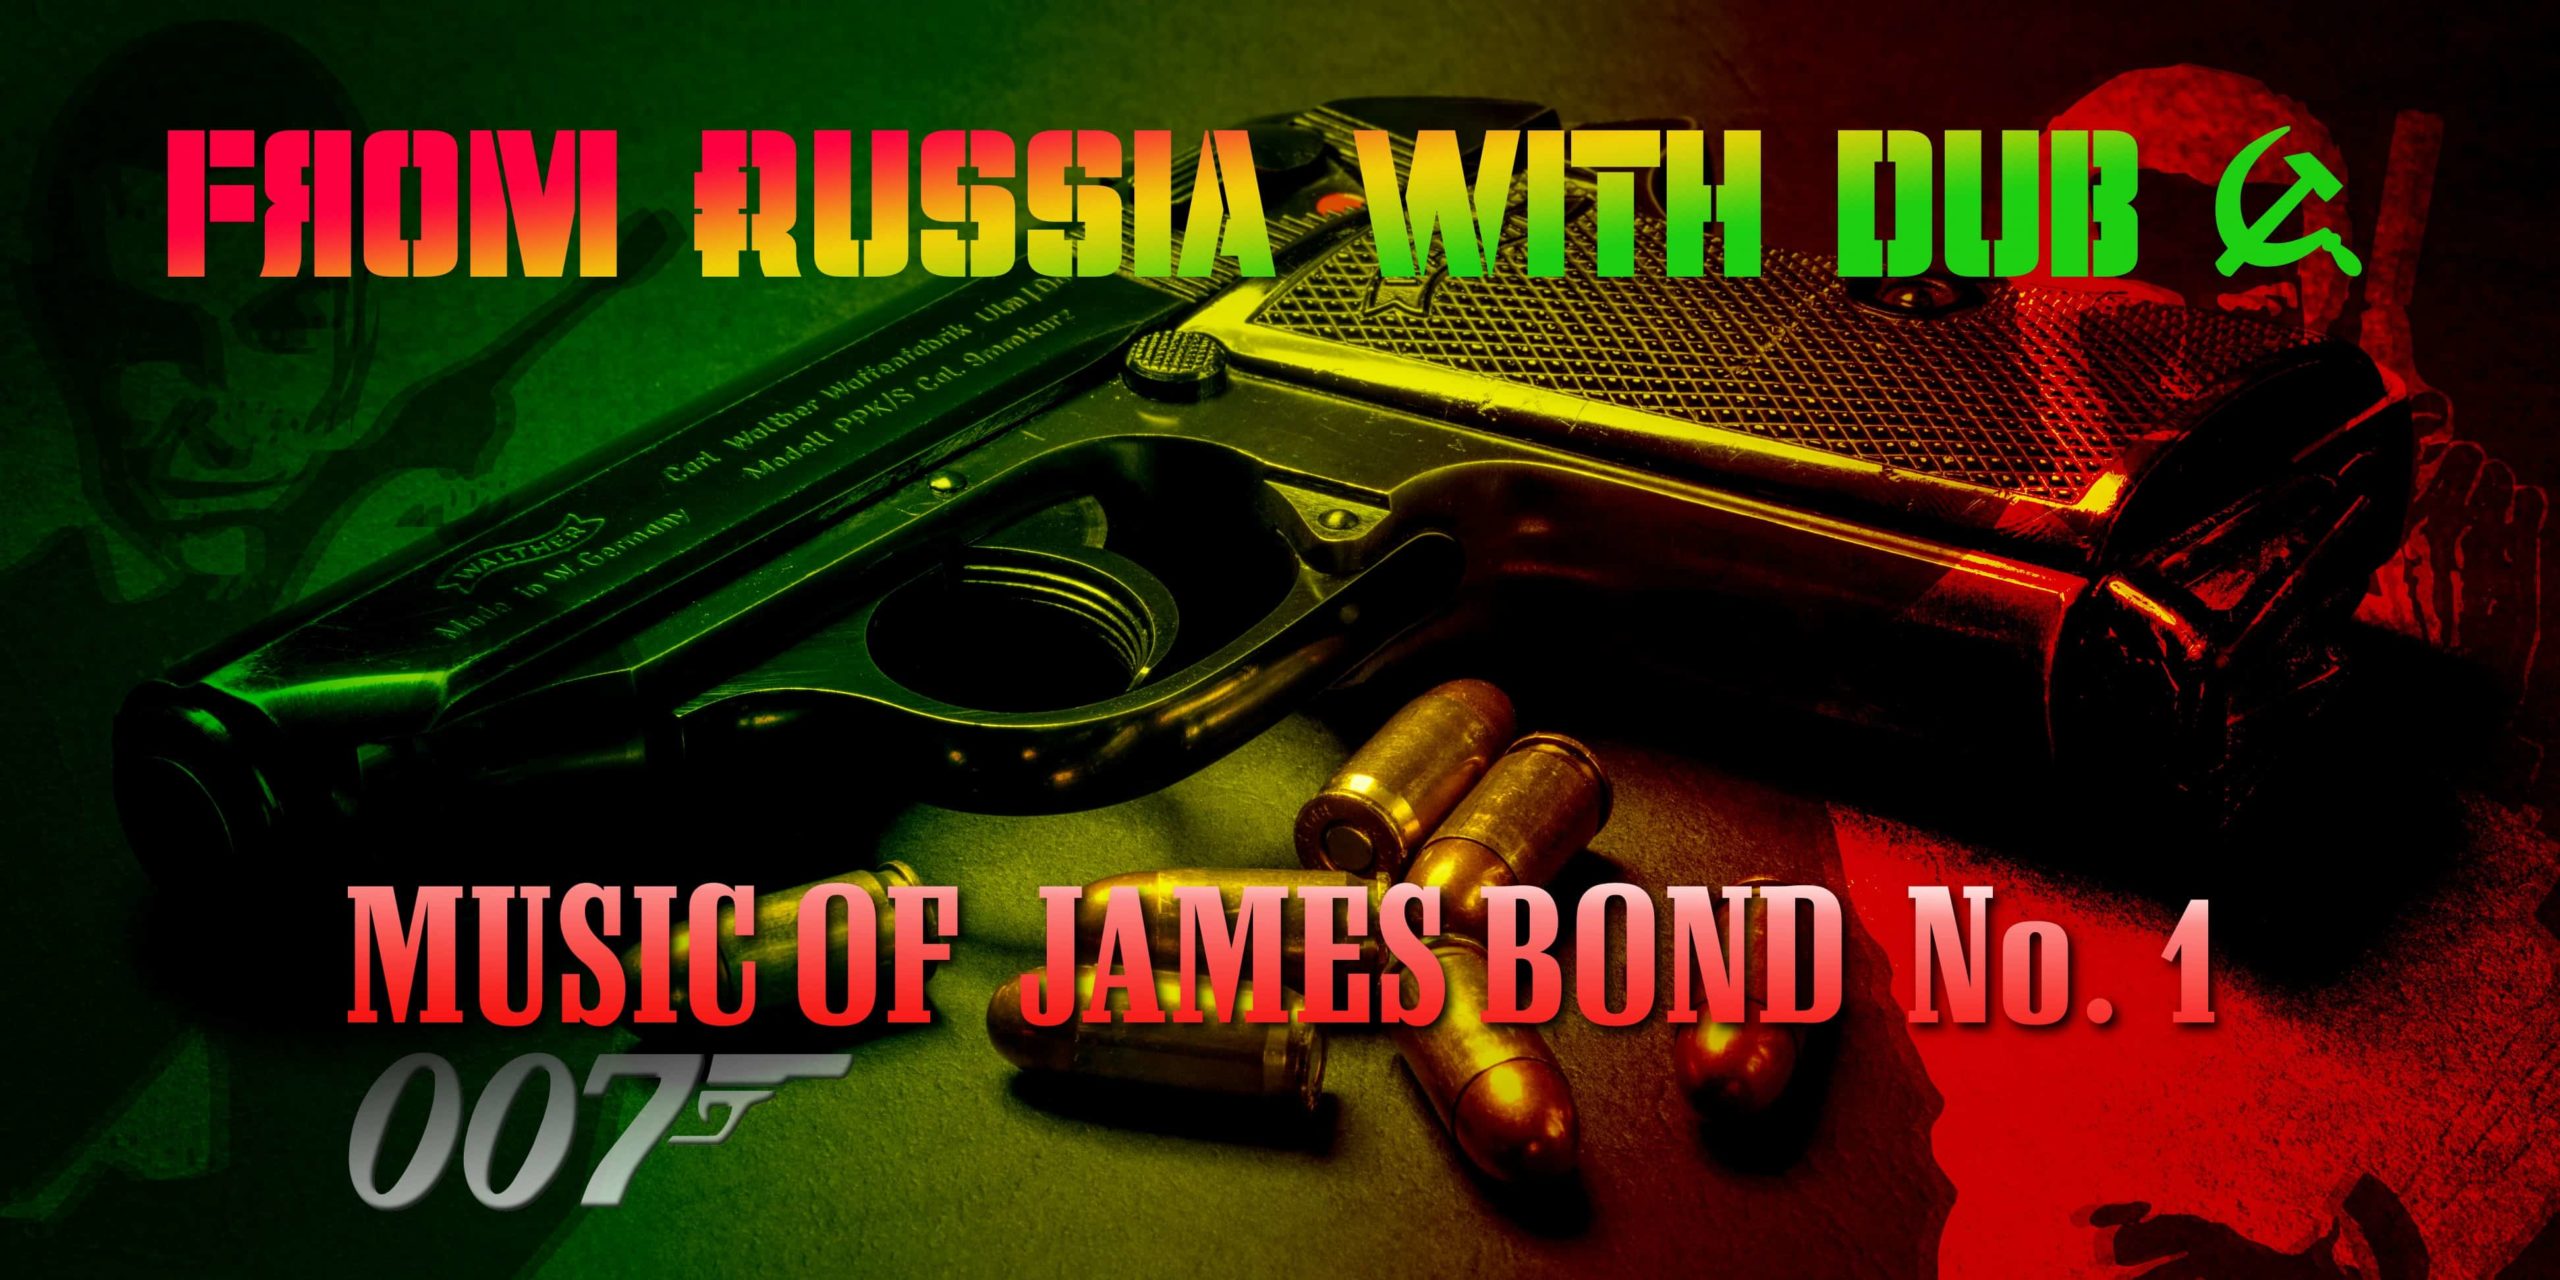 RC 319: From Russia With Dub – James Bond No.1 Bond music podcast for the delayed No Time To Die new film John Barry and Monty Norman and many more - cover art with gun and spy font